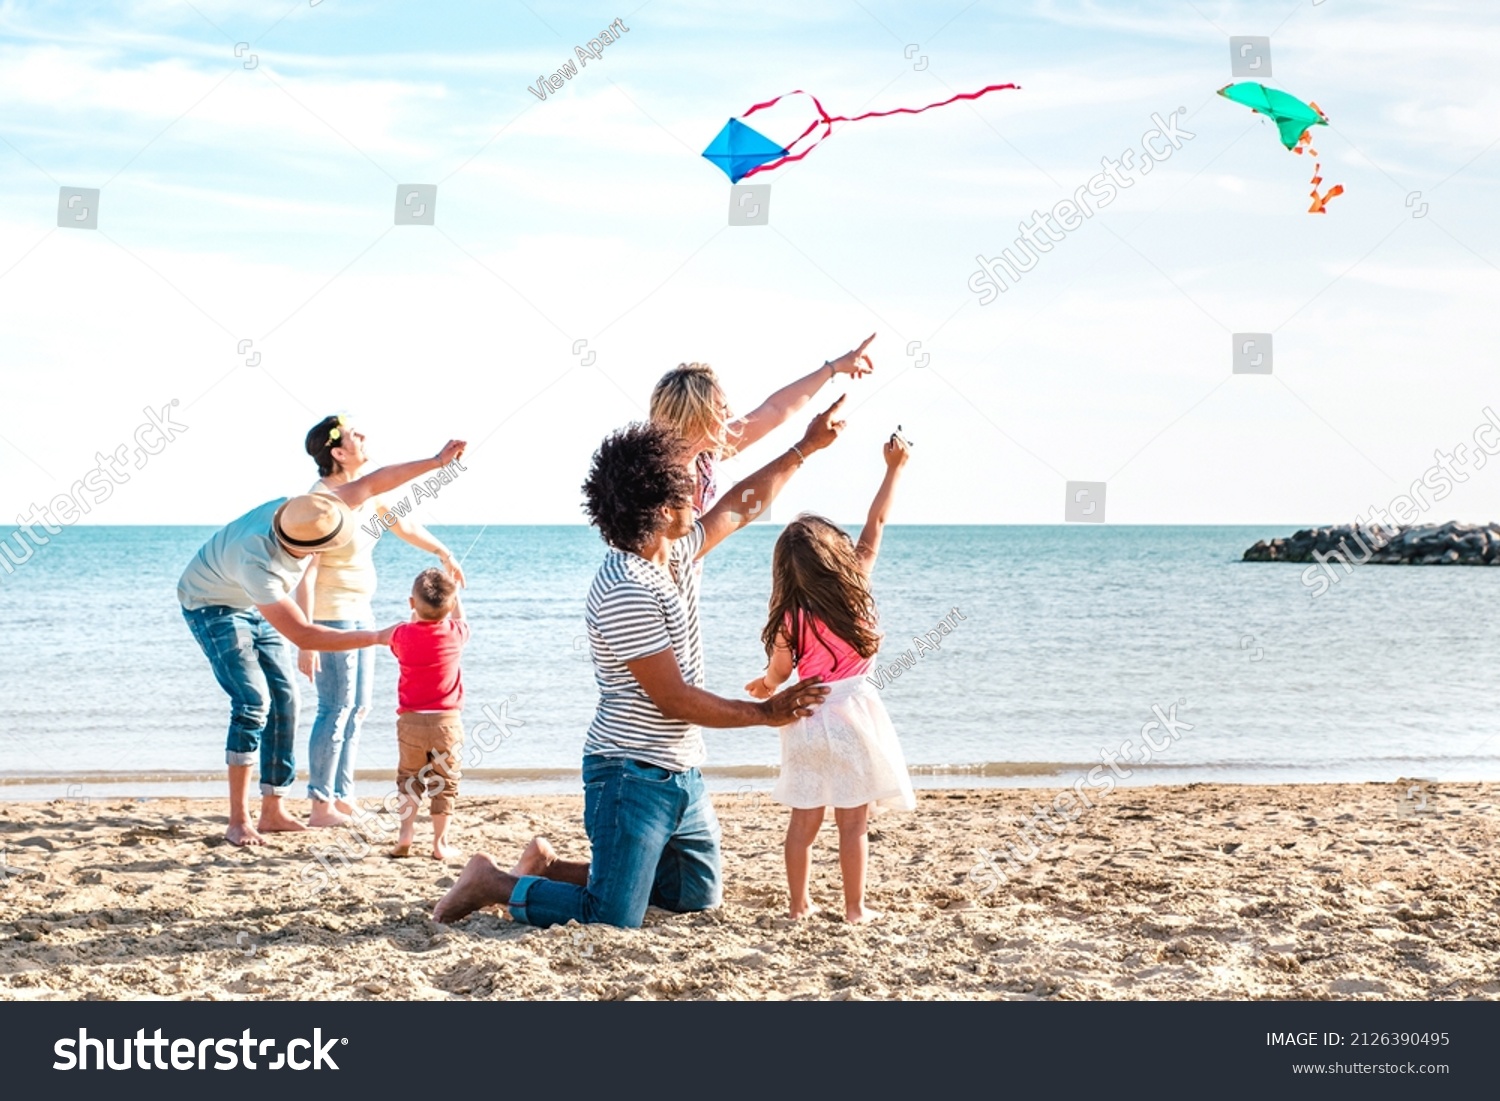 Multiple mixed families composed by parents and children playing with kite at beach vacation - Summer joy life style concept with candid people having fun together at seaside - Bright vivid filter #2126390495